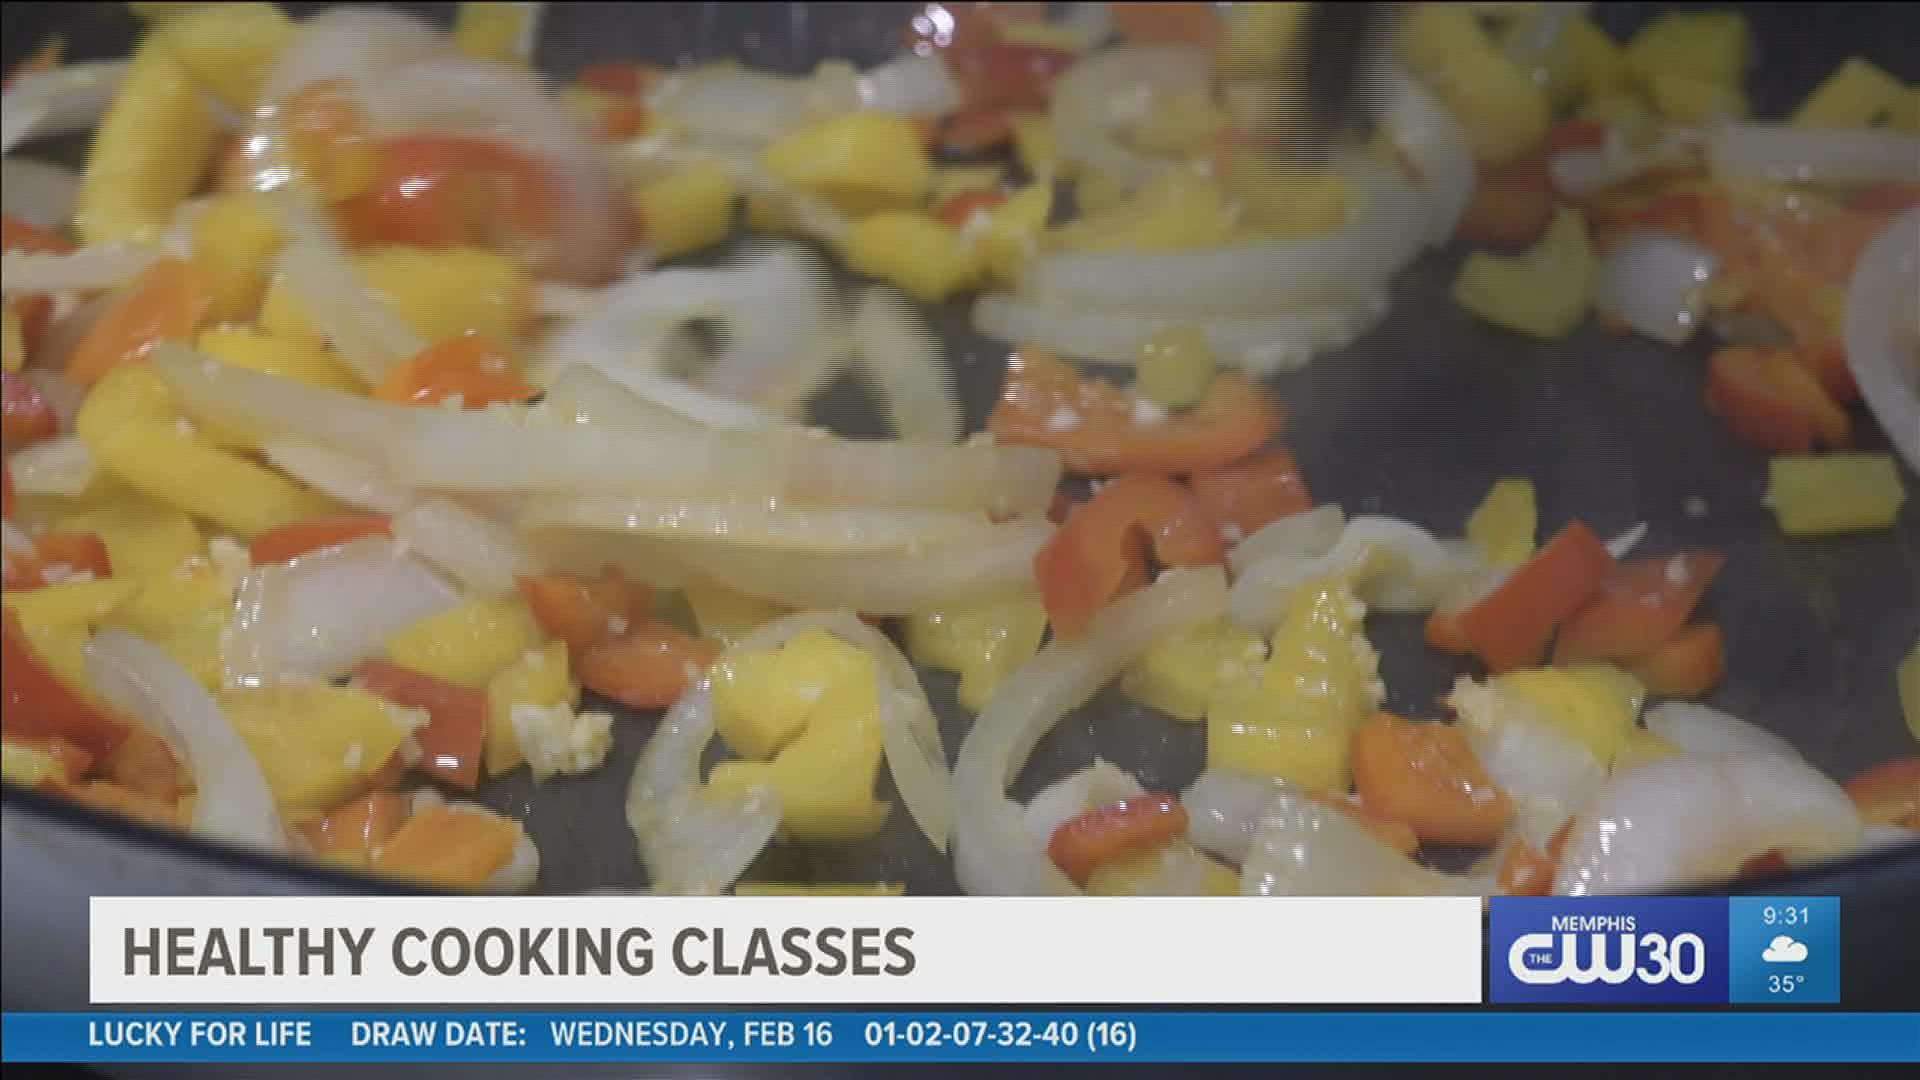 Church Health is offering a free-four week cooking series to people as young as 16.